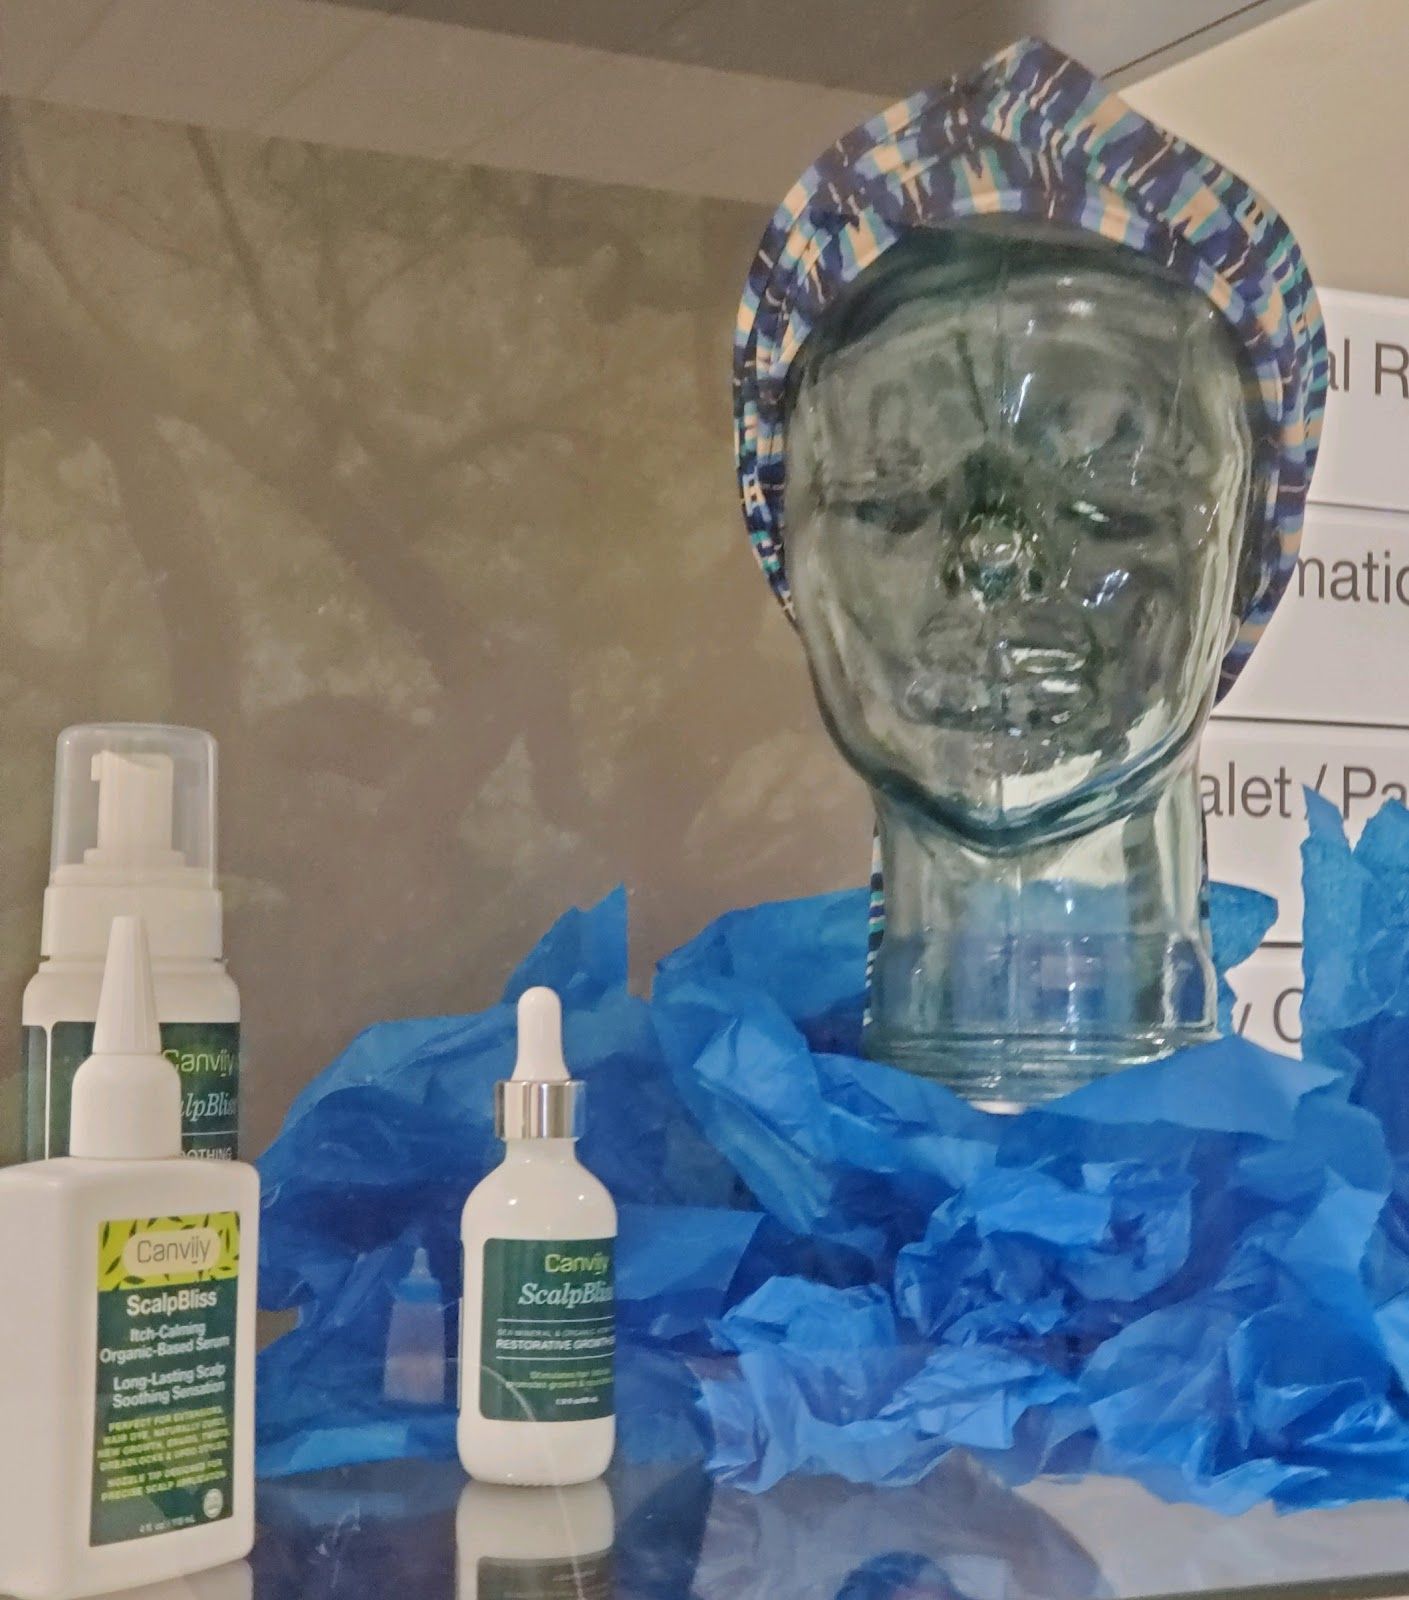 Canviiy products for patient scalp needs at Moffitt Cancer Center